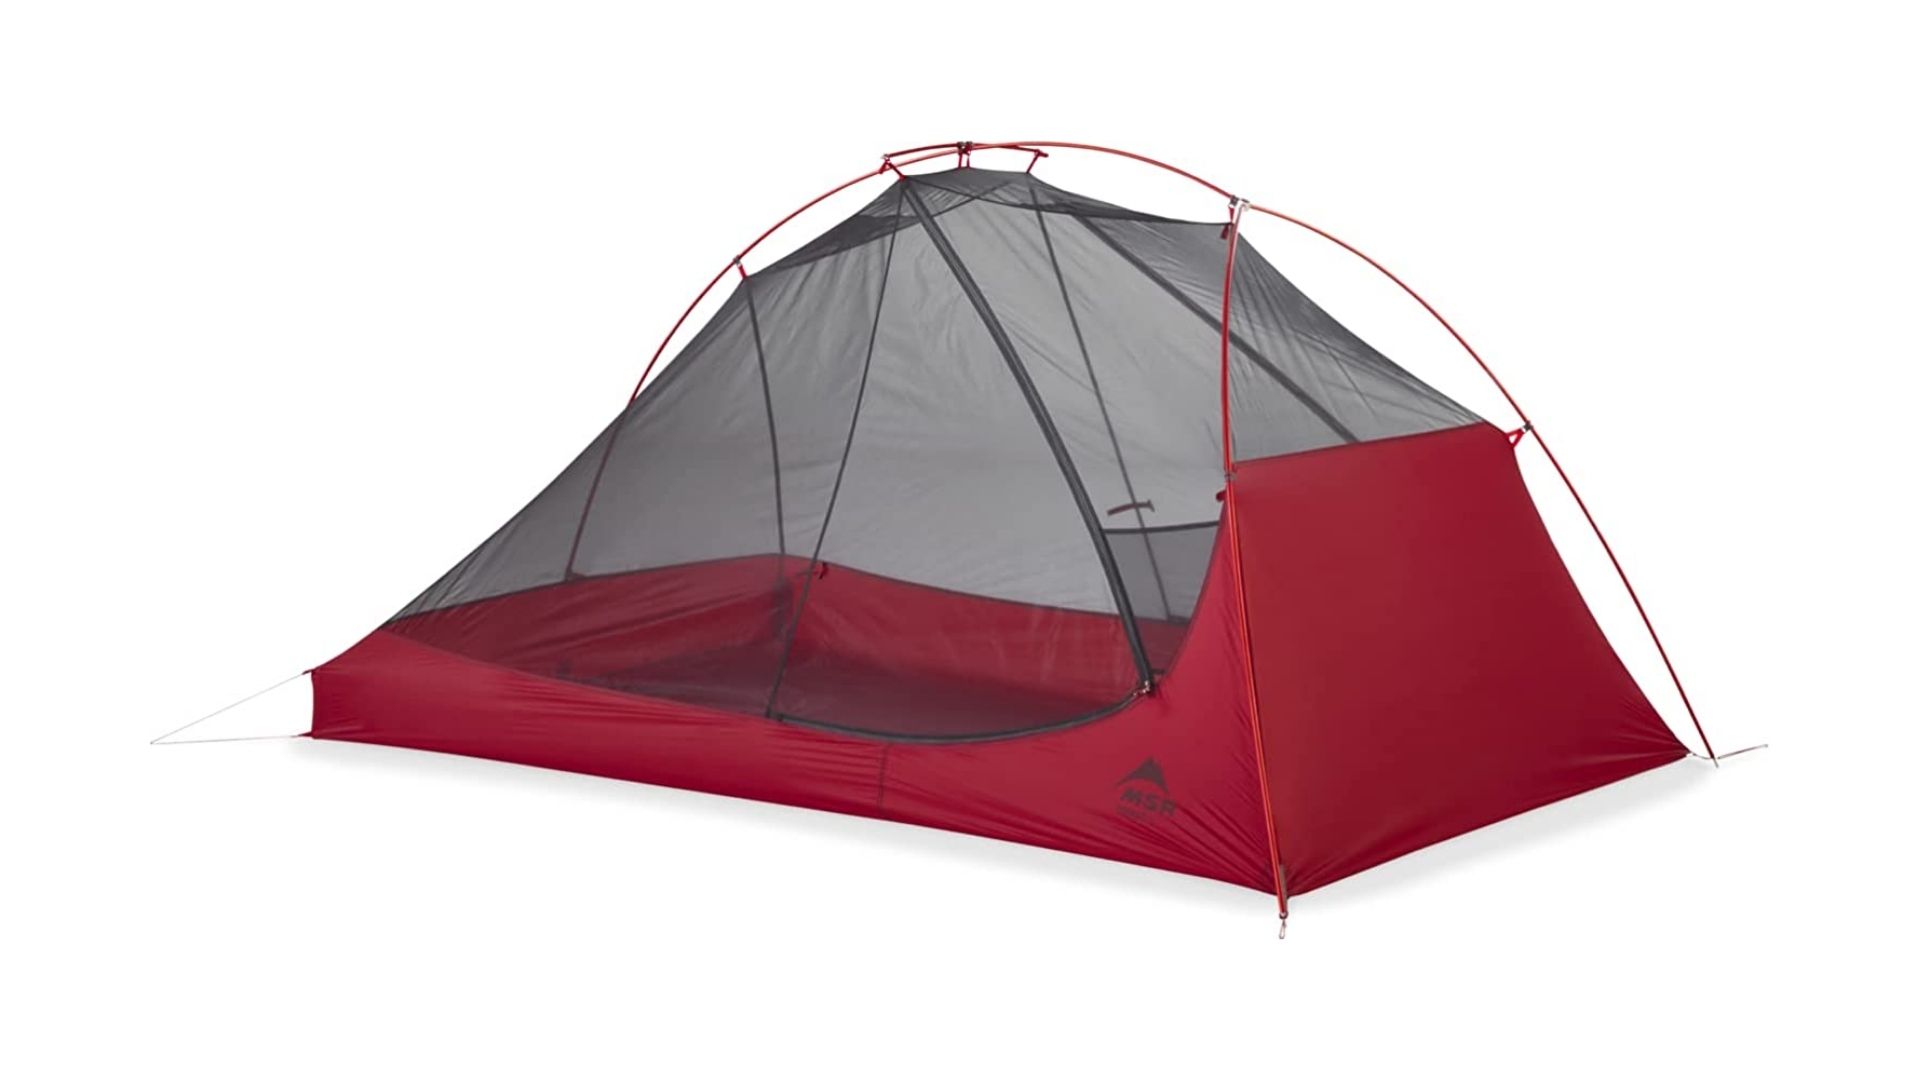 Backpacking Tents: How Light is Too Light?